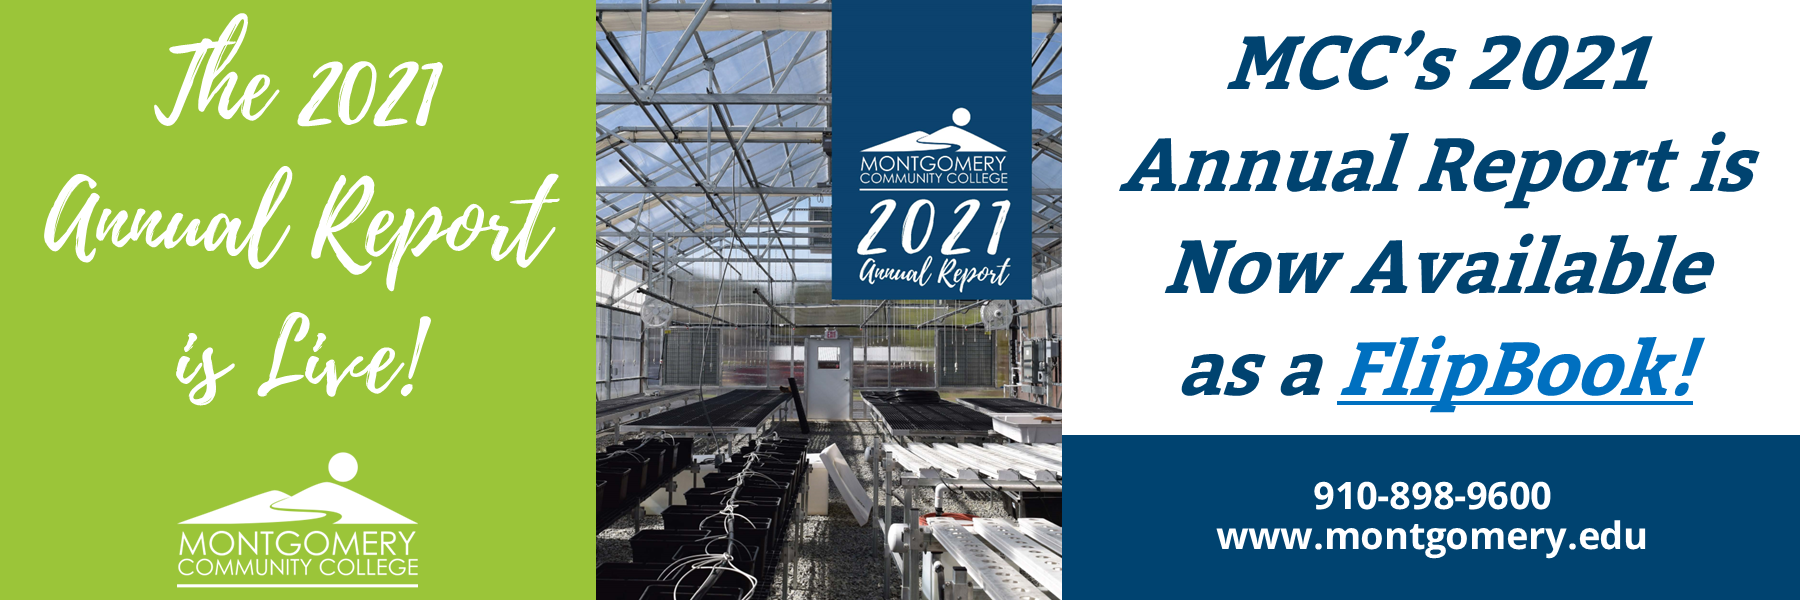 The 2021 annual report is live! MCC's 2021 annual report is now available as a flipbook! 910-898-9600 www.montgomery.edu